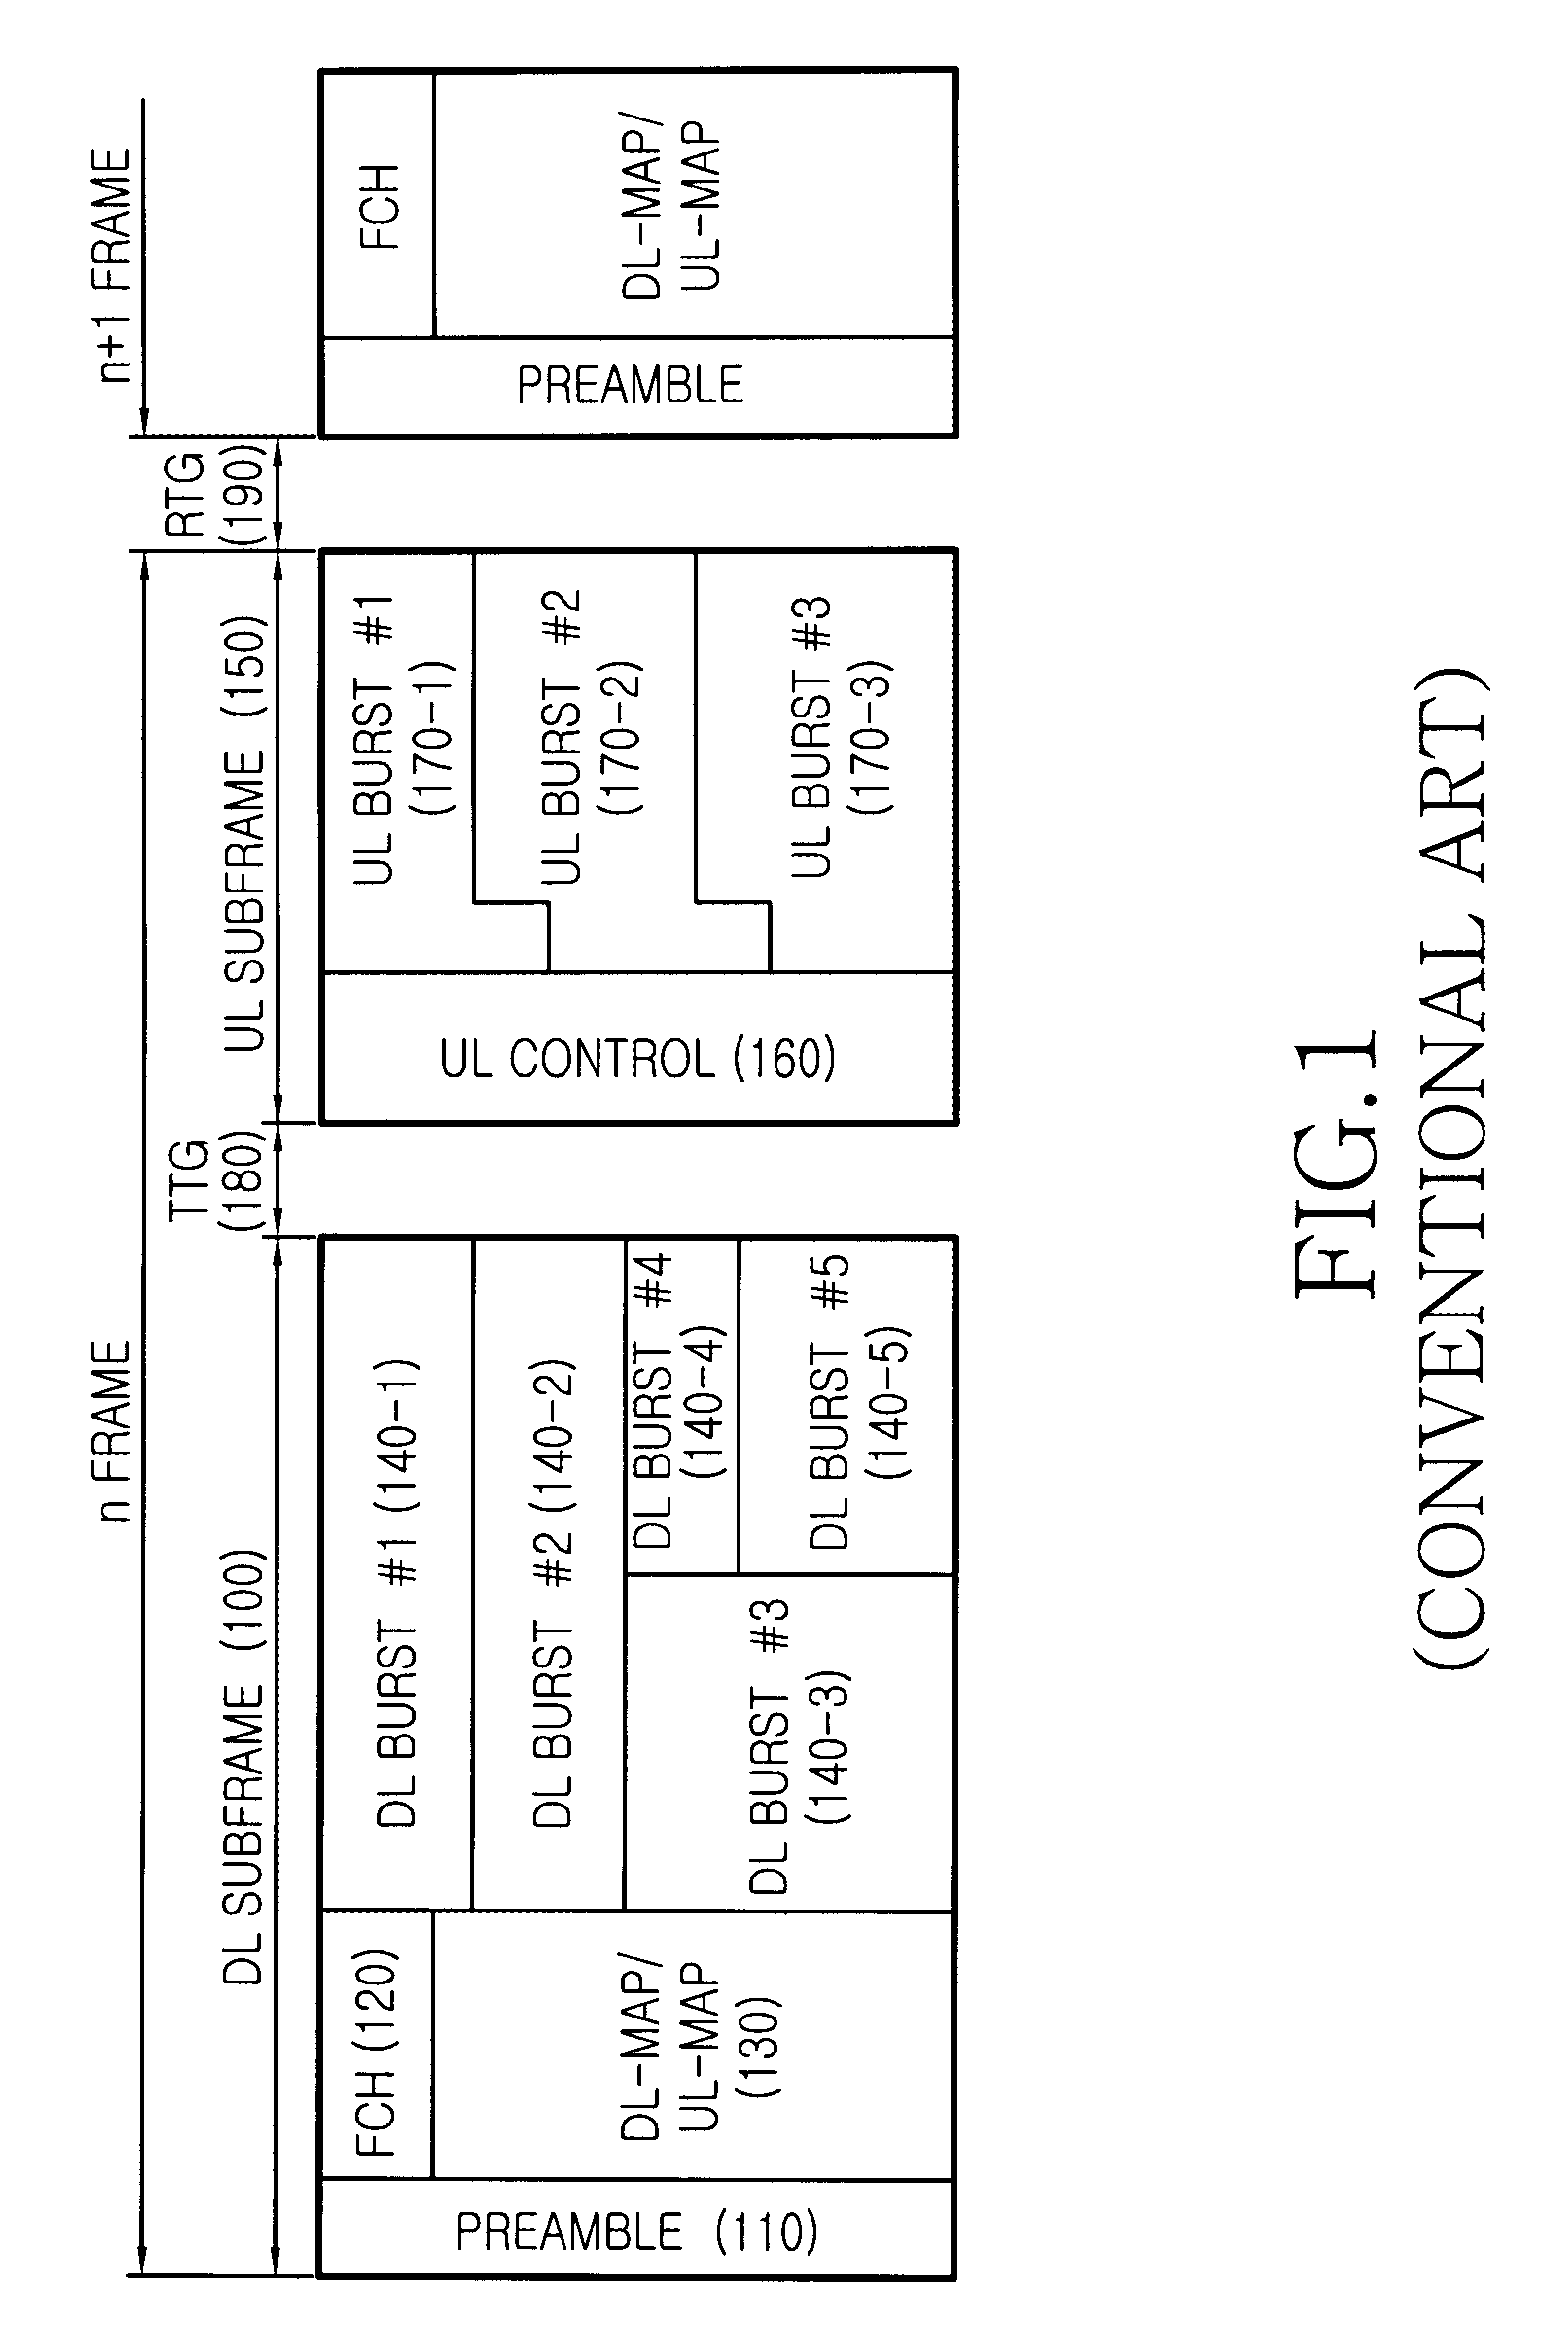 Method and system for configuring a frame in a communication system